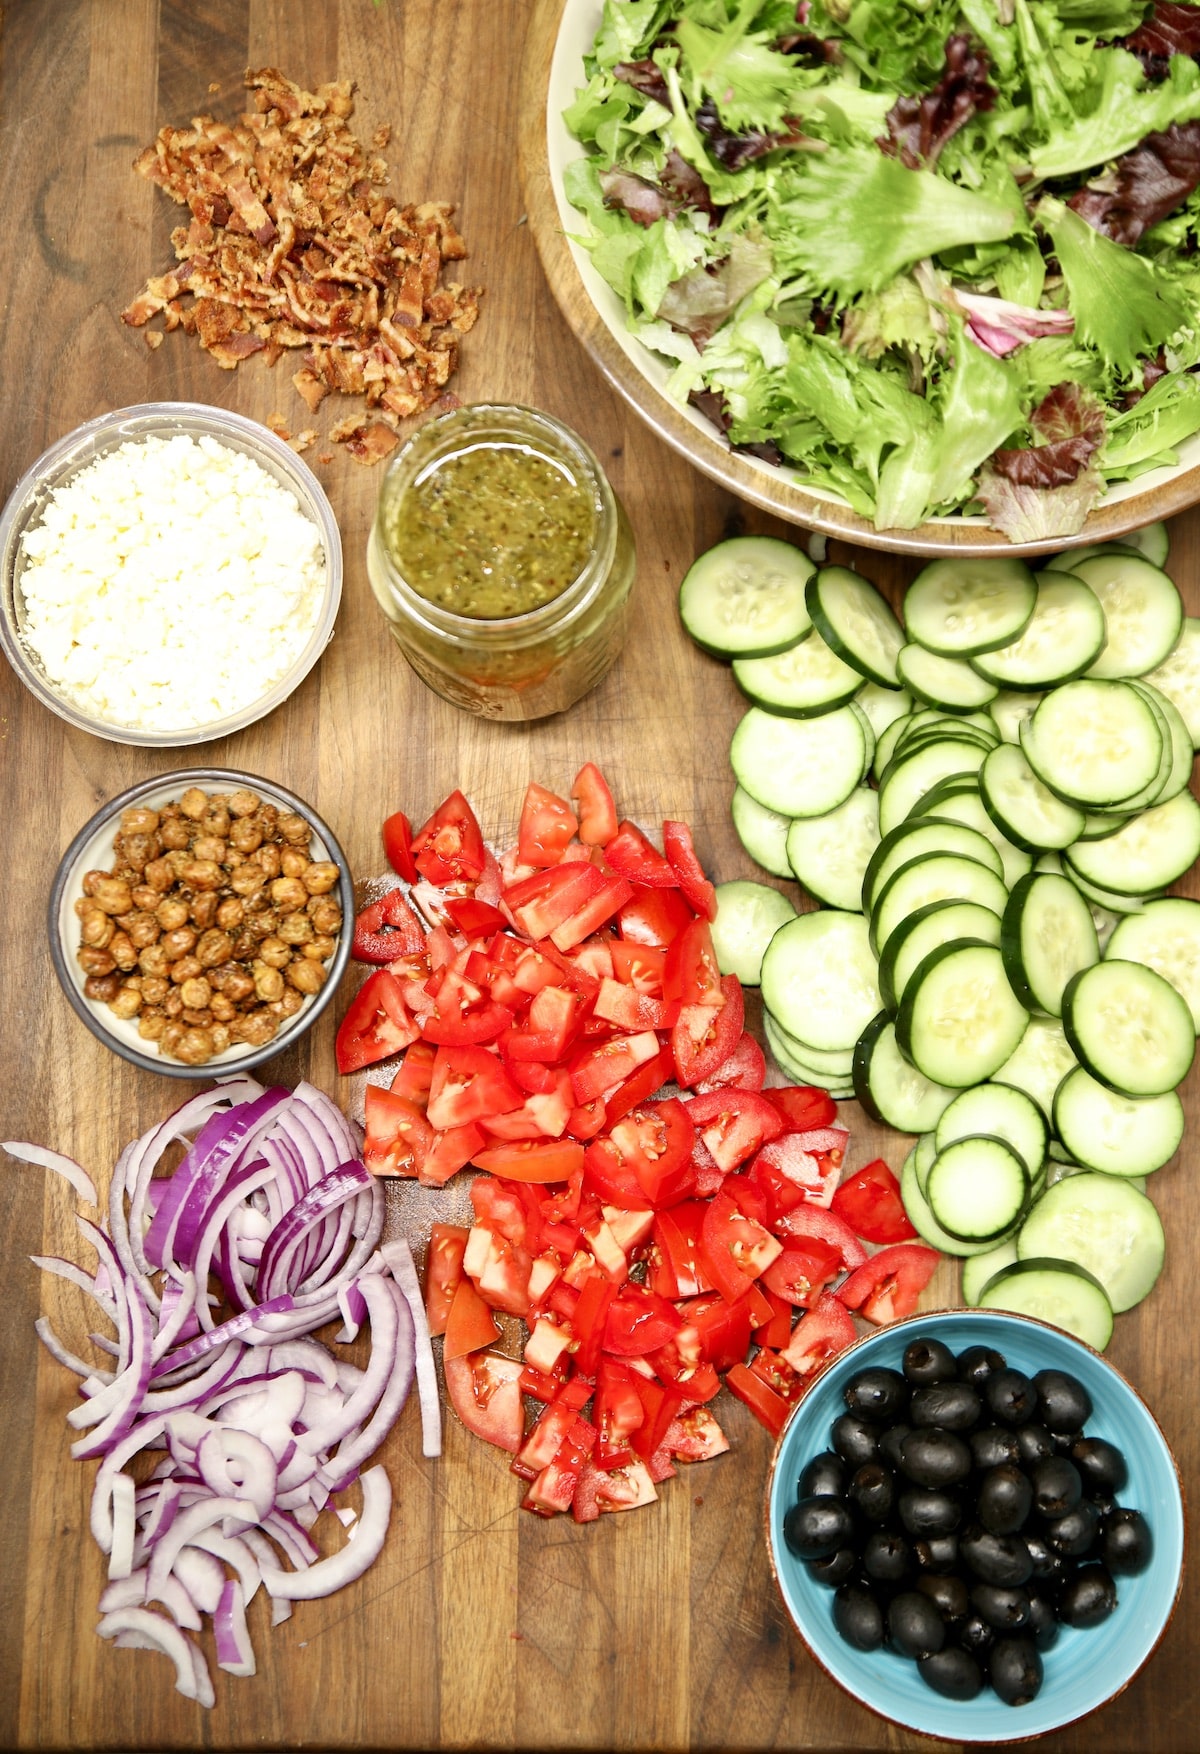 Greek salad board with lettuce, onions, tomatoes, cucumbers.